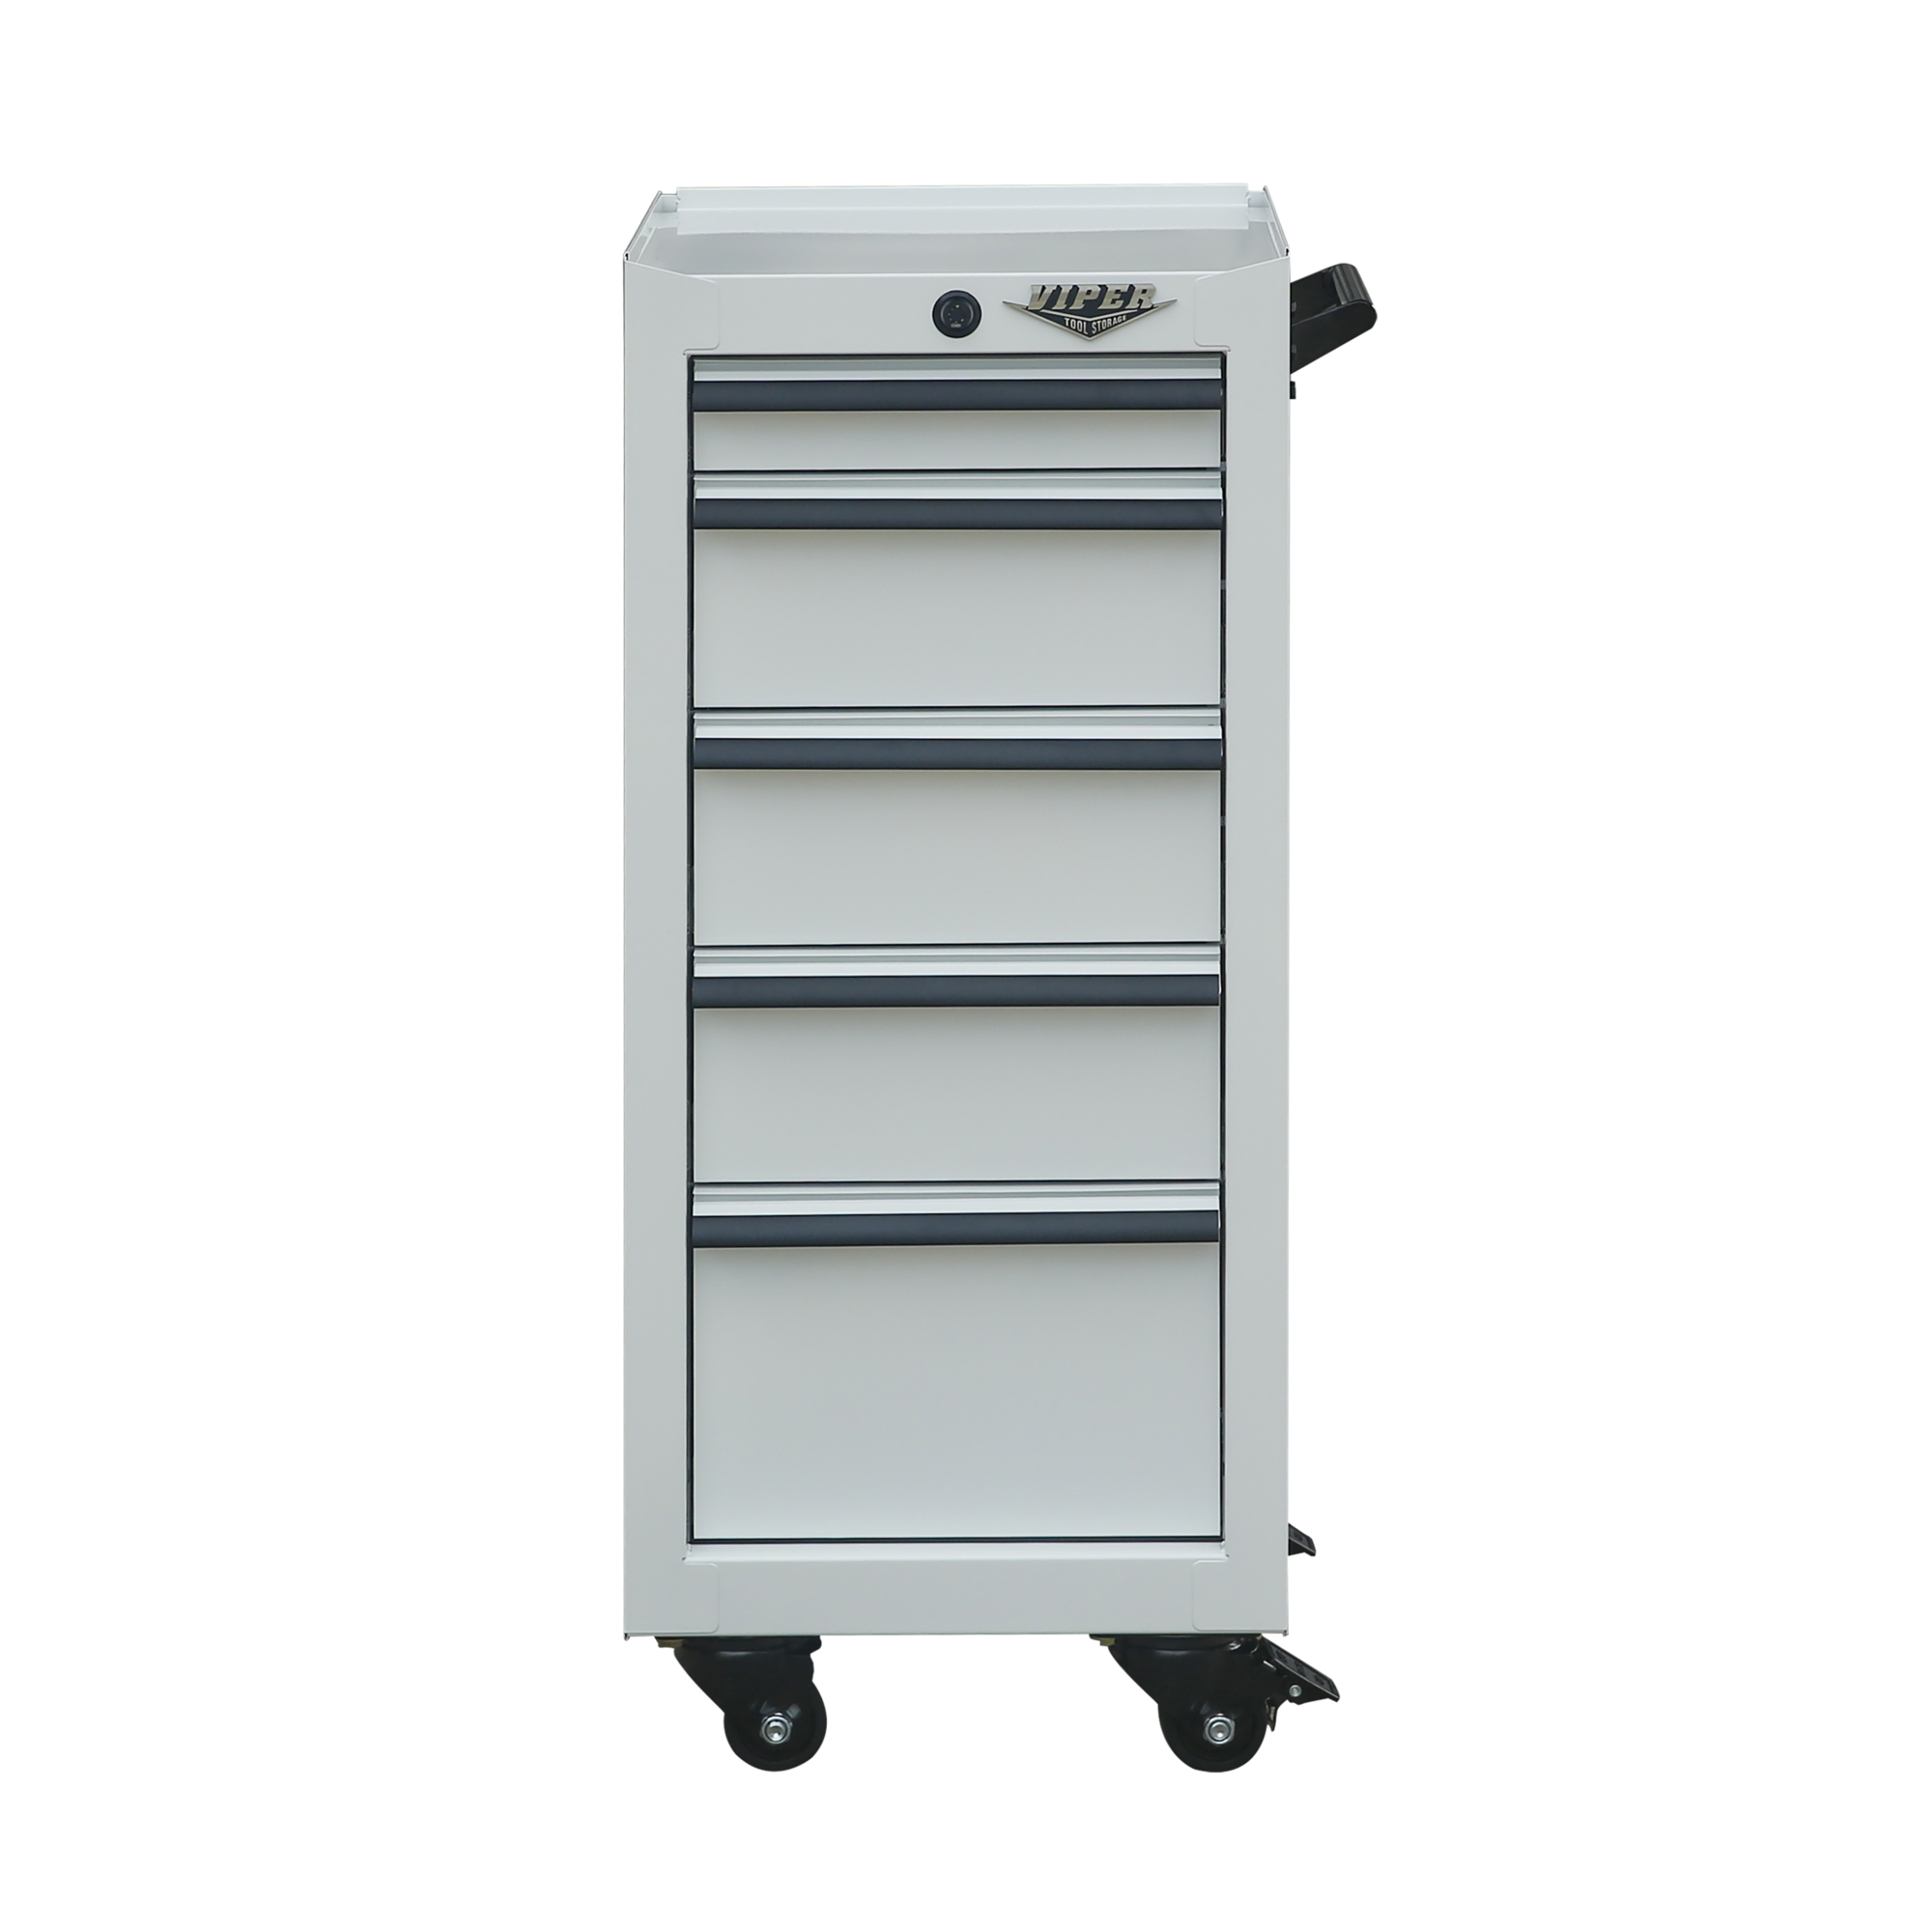 Viper Tool Storage, 5-Drawer 18G Steel Rolling Cart, White, Width 15.8 in, Height 37.3 in, Color White, Model V1605WHR